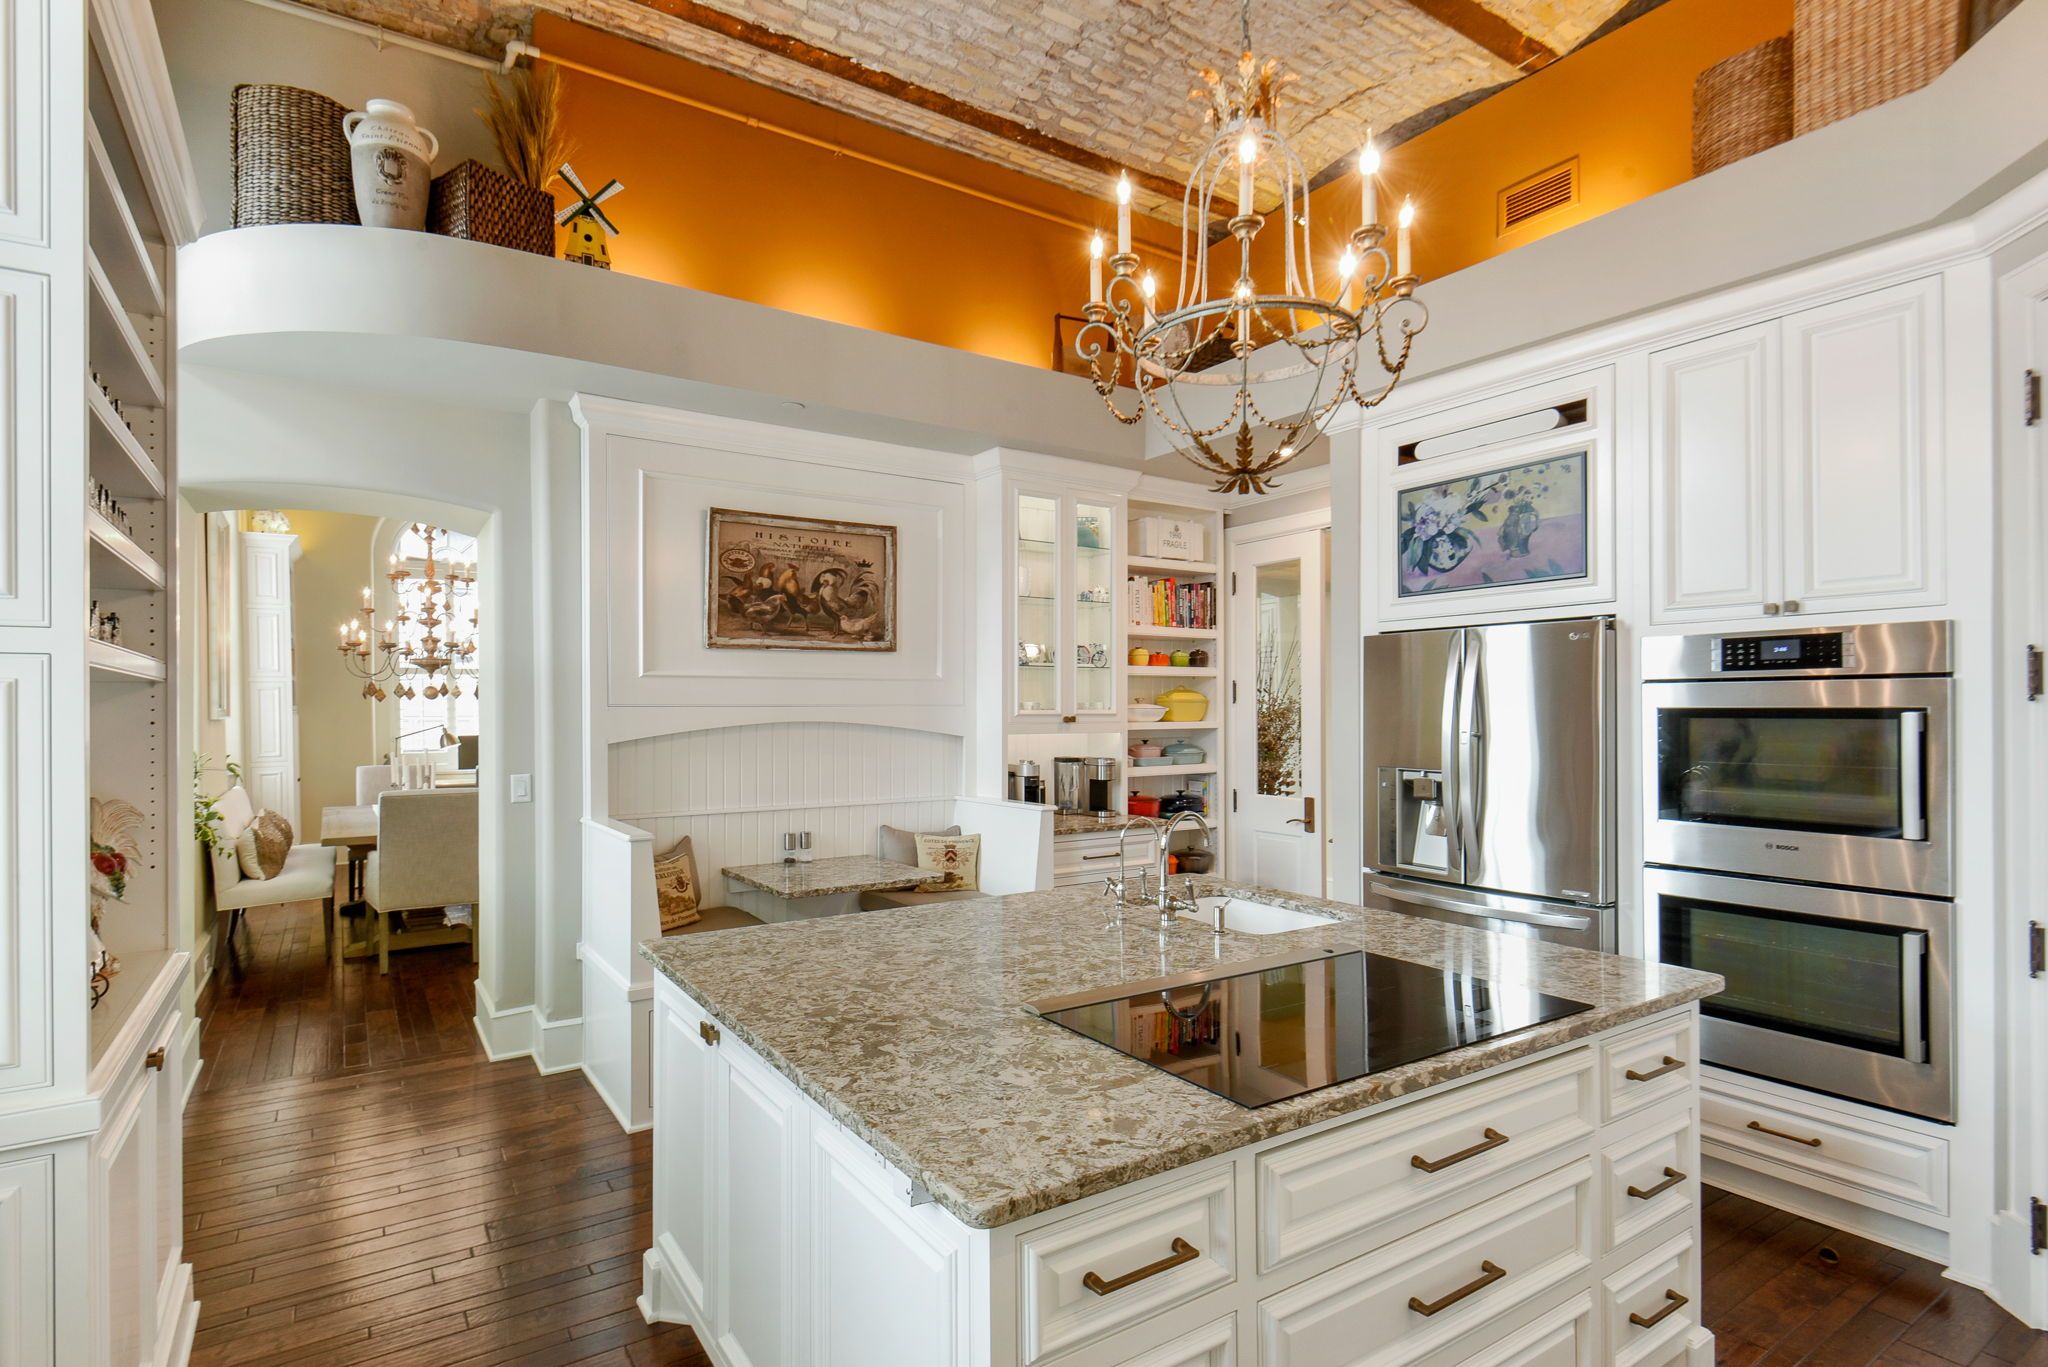 A photo of a kitchen with orange walls and white cabinets.